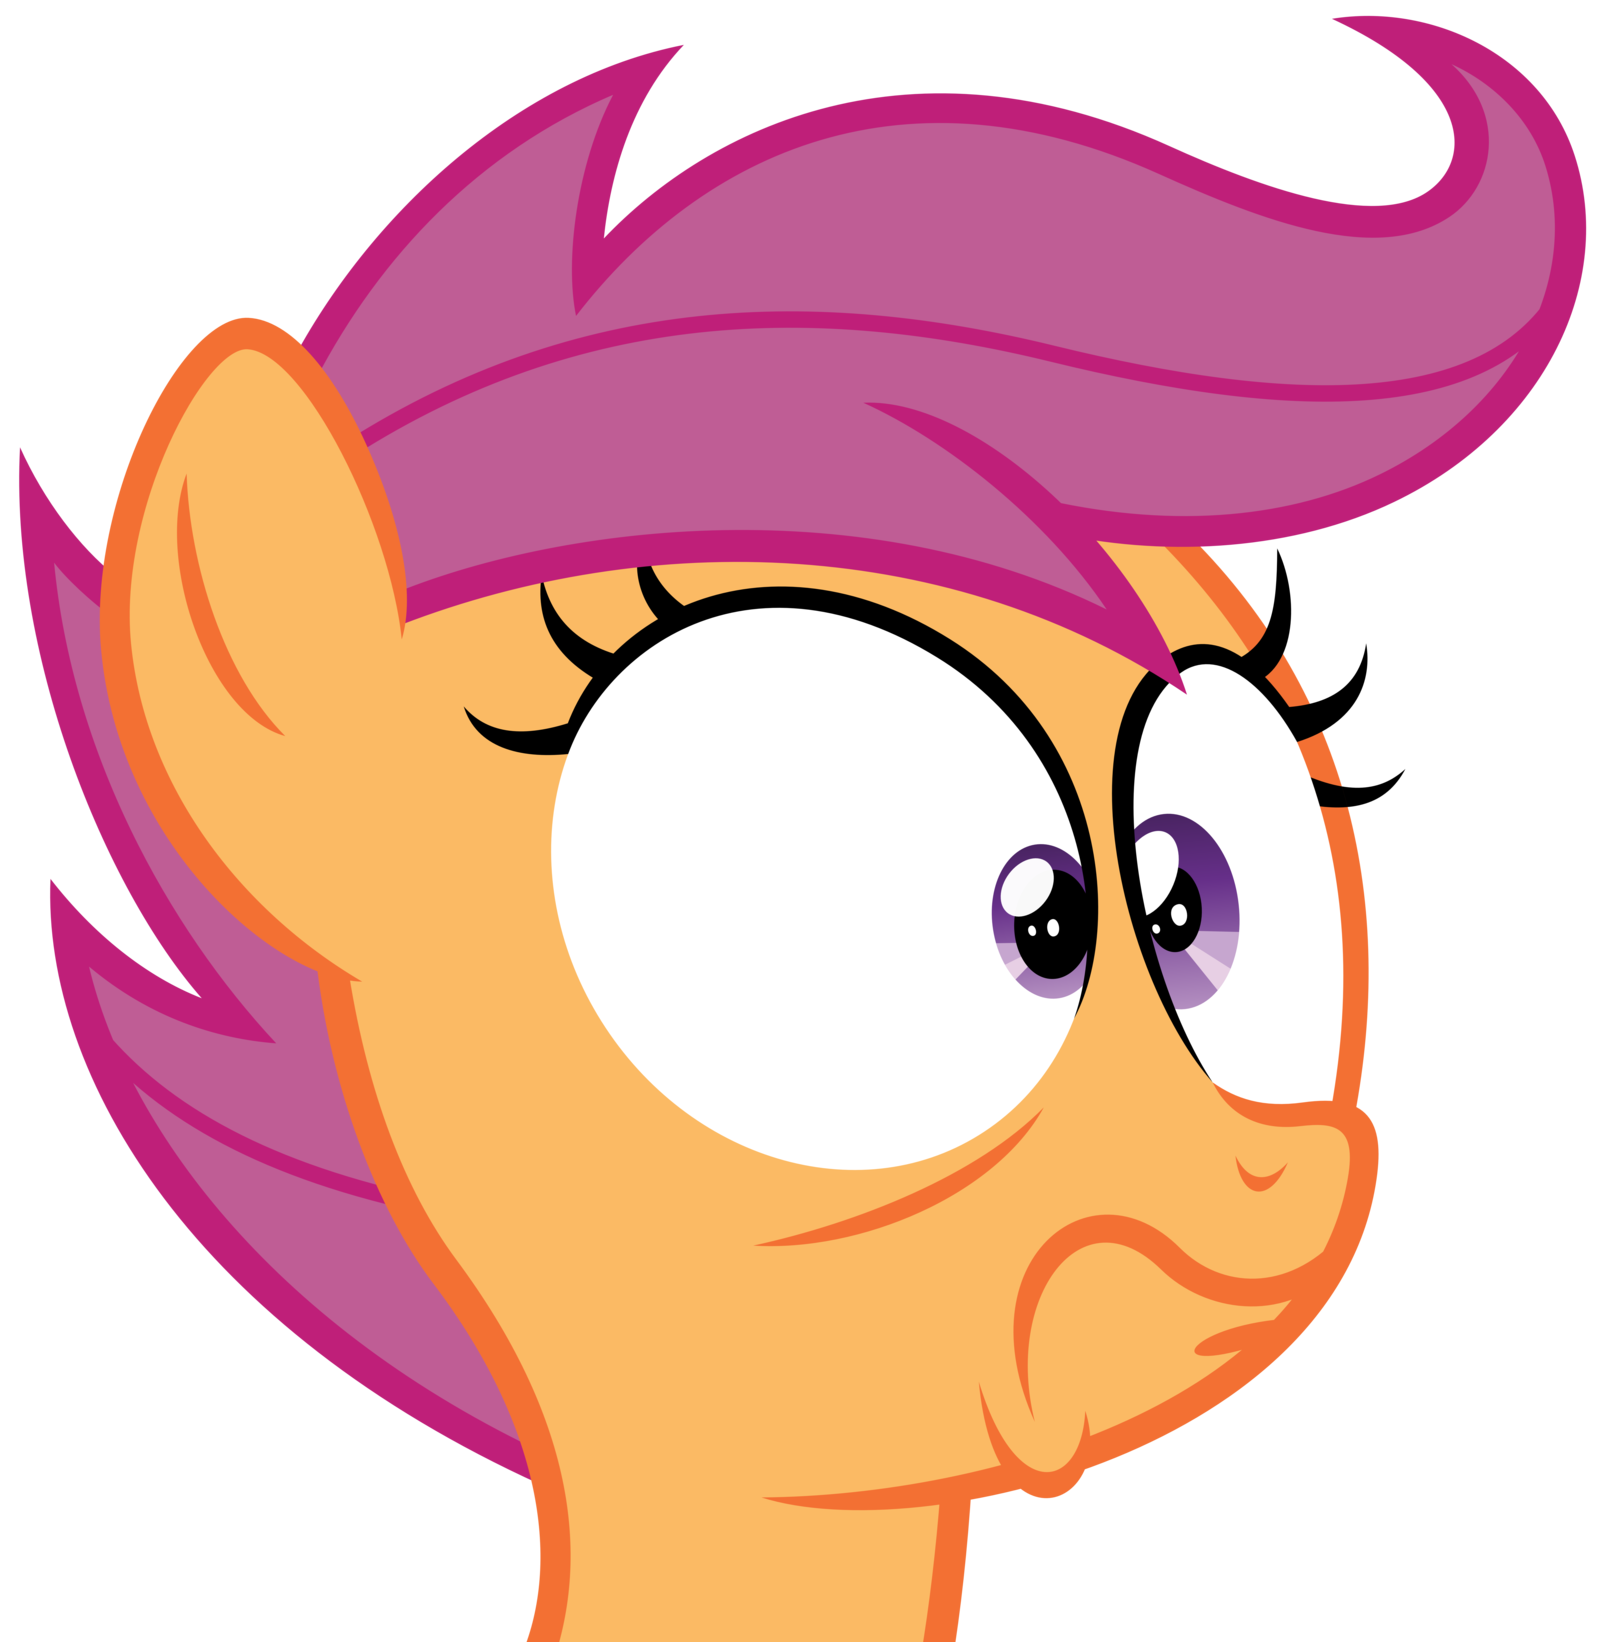 scootaloo_oh_no_by_myardius-d5oe9t9.png